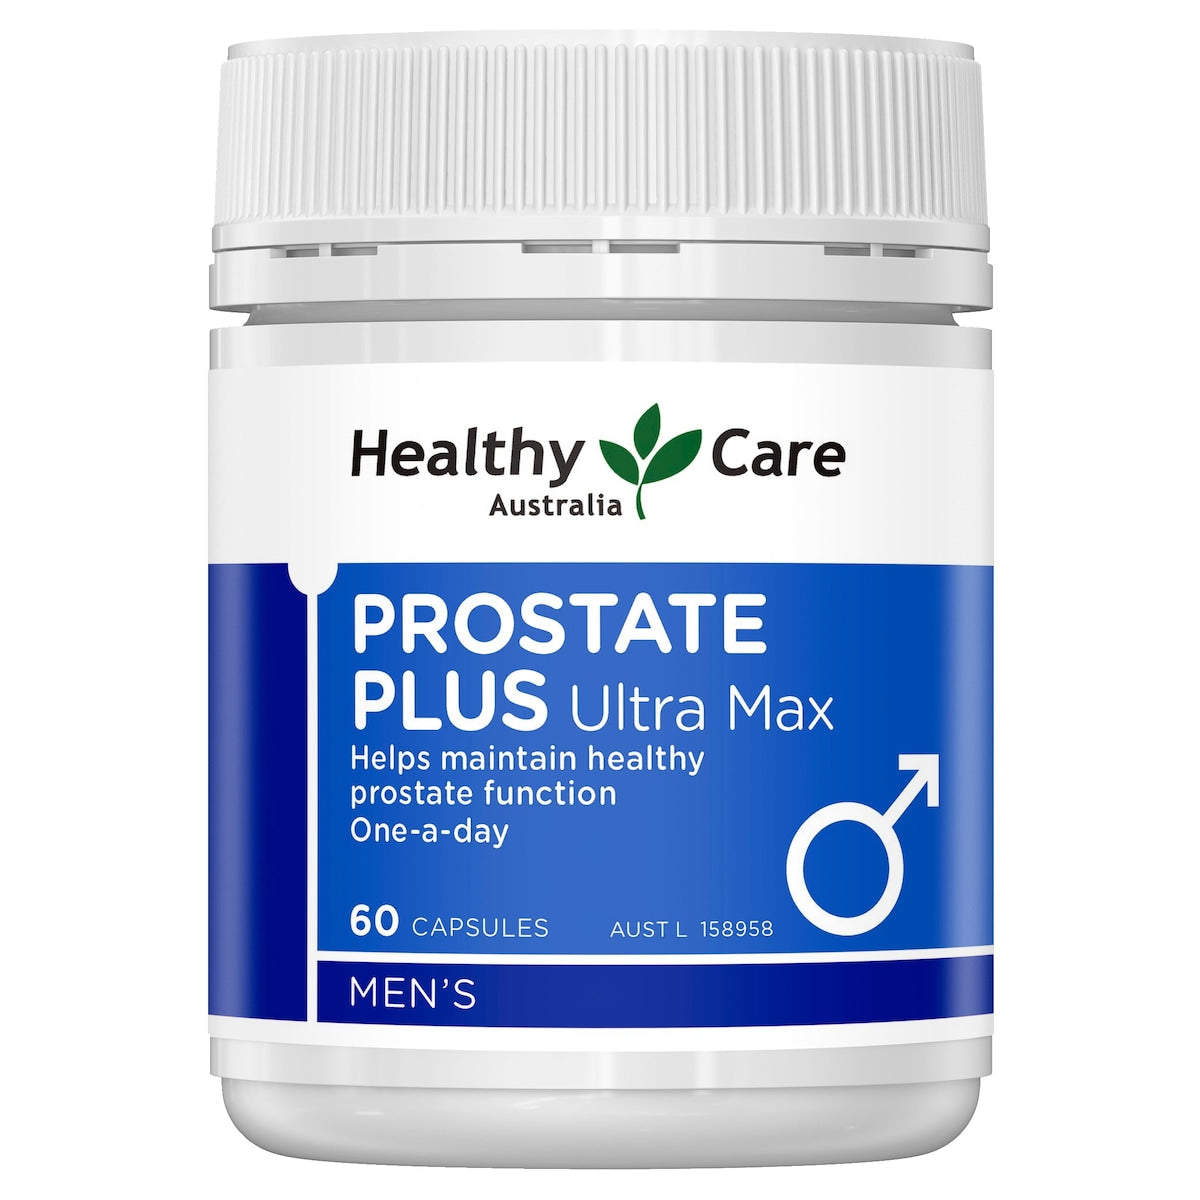 Healthy Care Prostate Care Plus Ultramax 60 Capsules